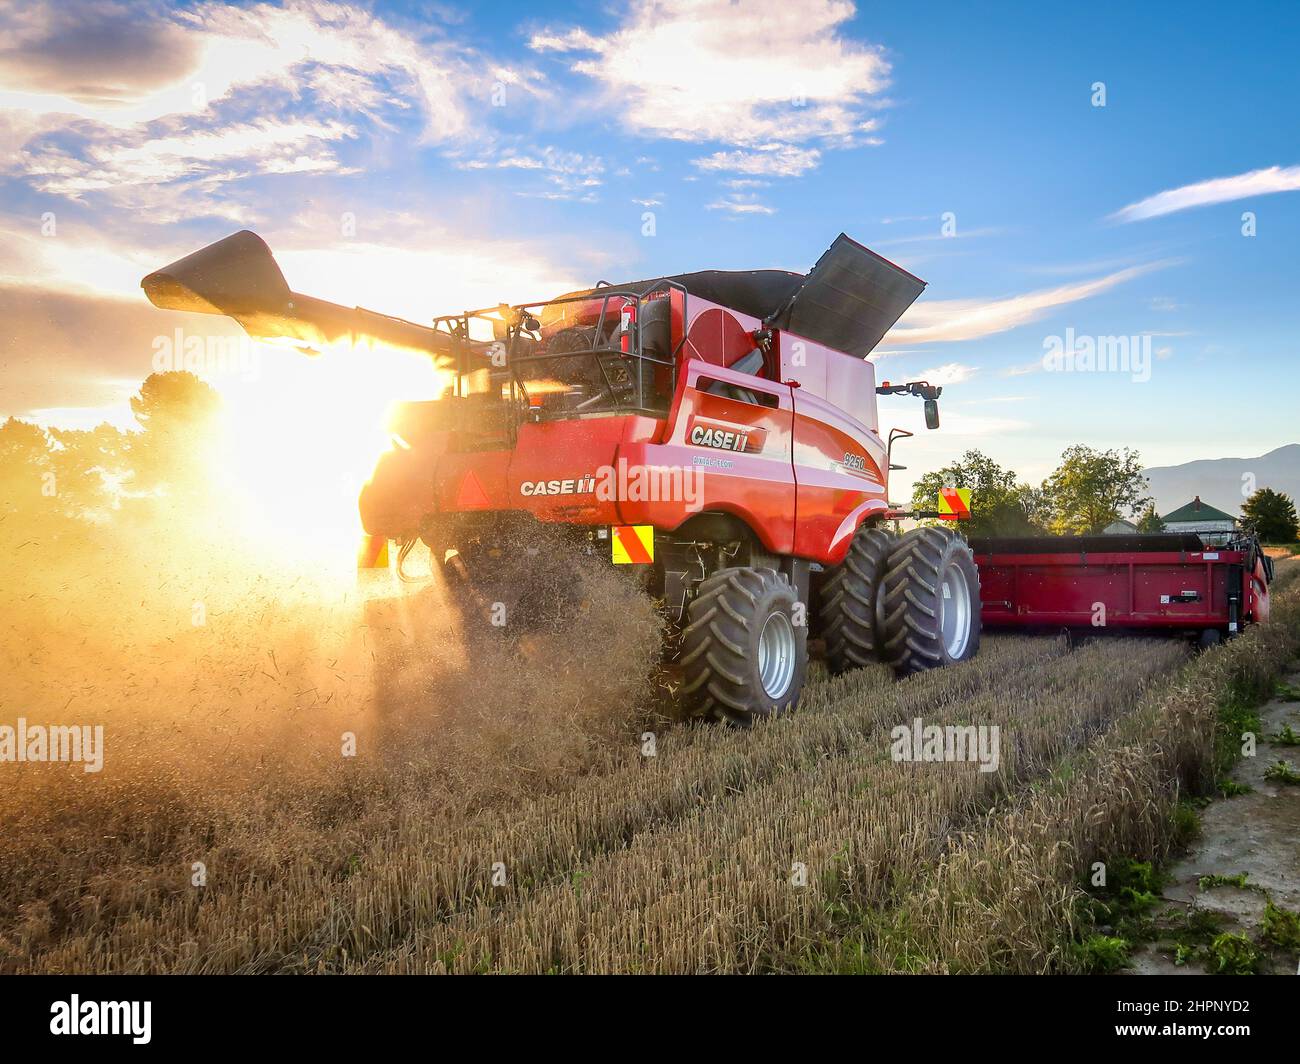 Sheffield, Canterbury, New Zealand, February 18 2022:  A large modern Case harvester with new automated technology, at work harvesting barley Stock Photo